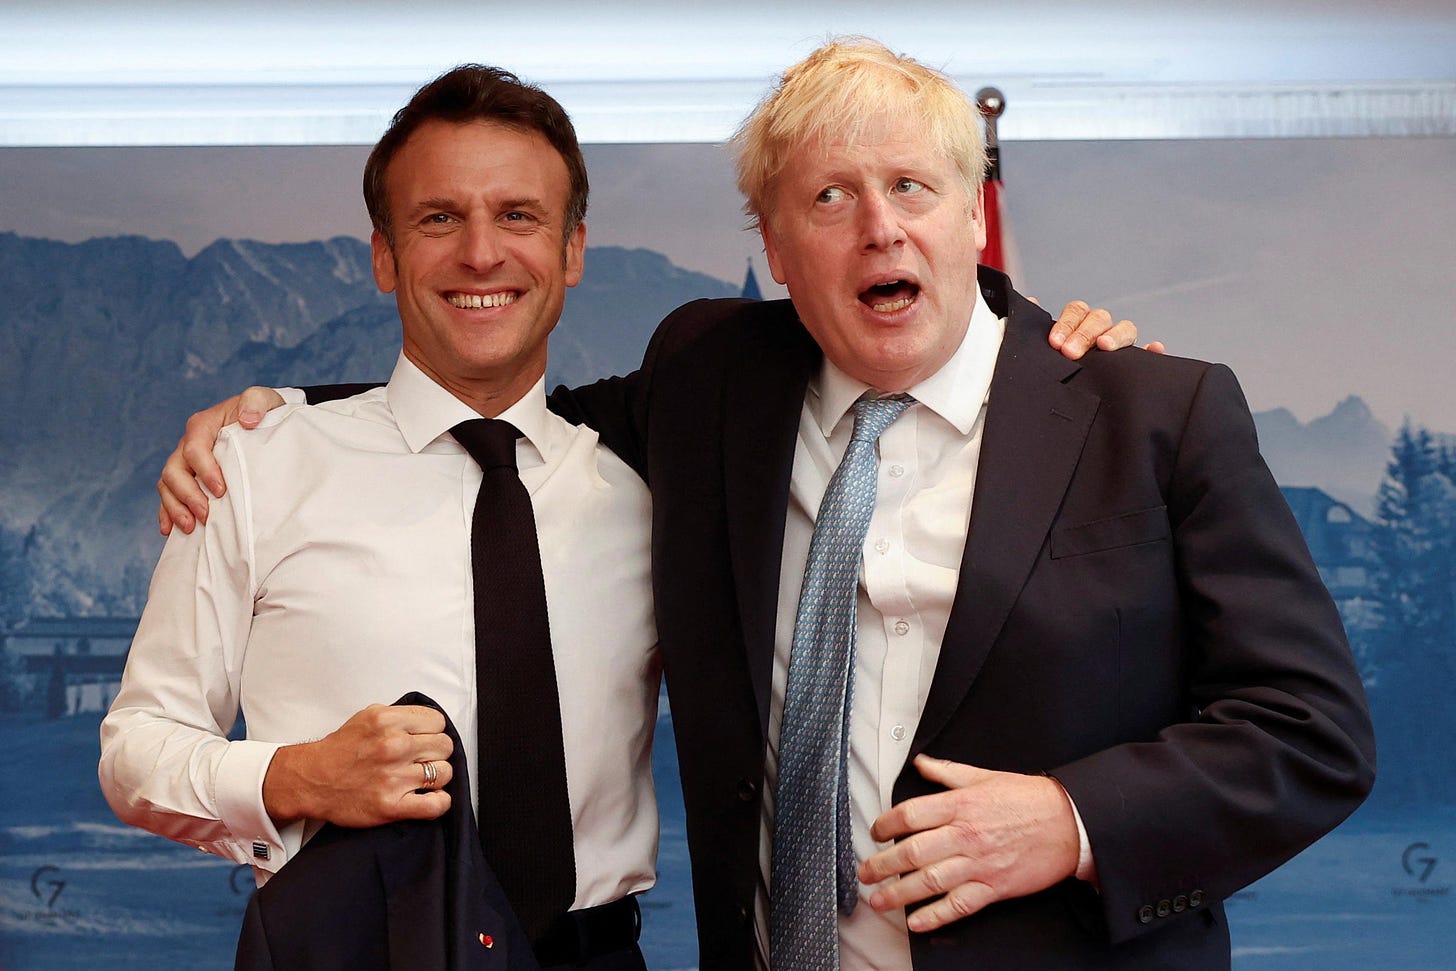 Boris Johnson 'wanted to punch Macron's lights out' over Ukraine